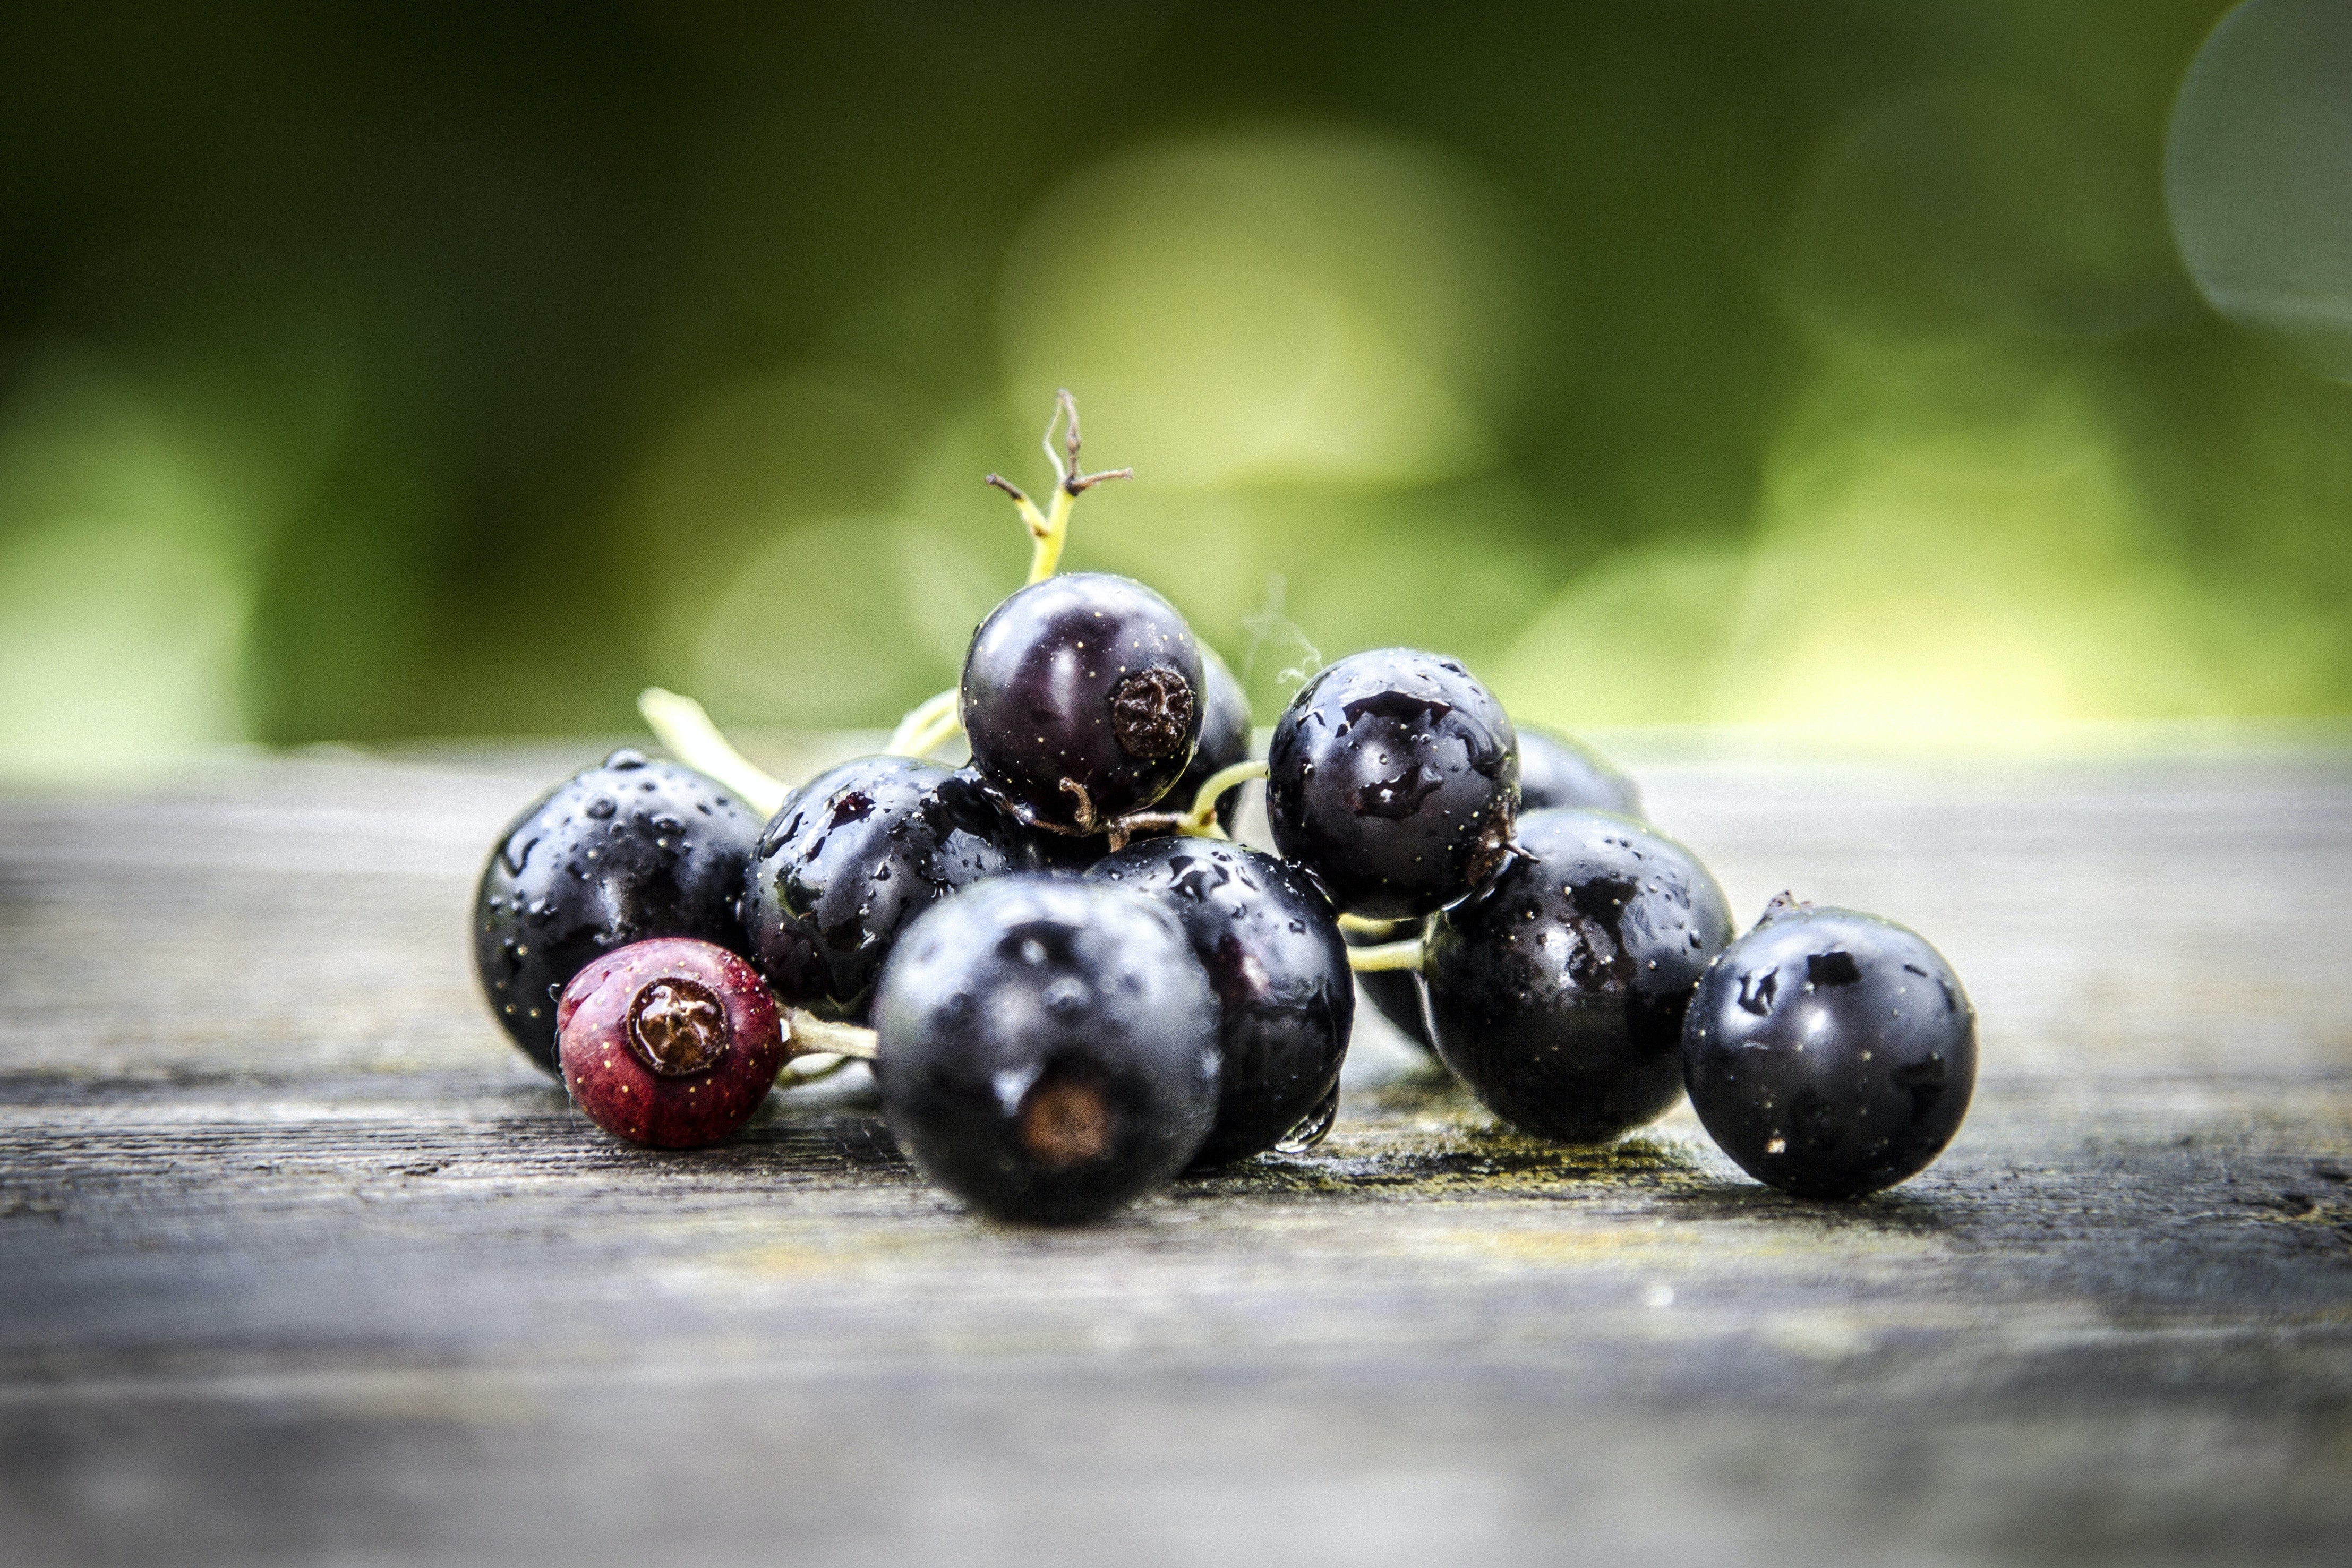 Black Currant: the Crazy History Behind Our Bestselling Seltzer Flavor